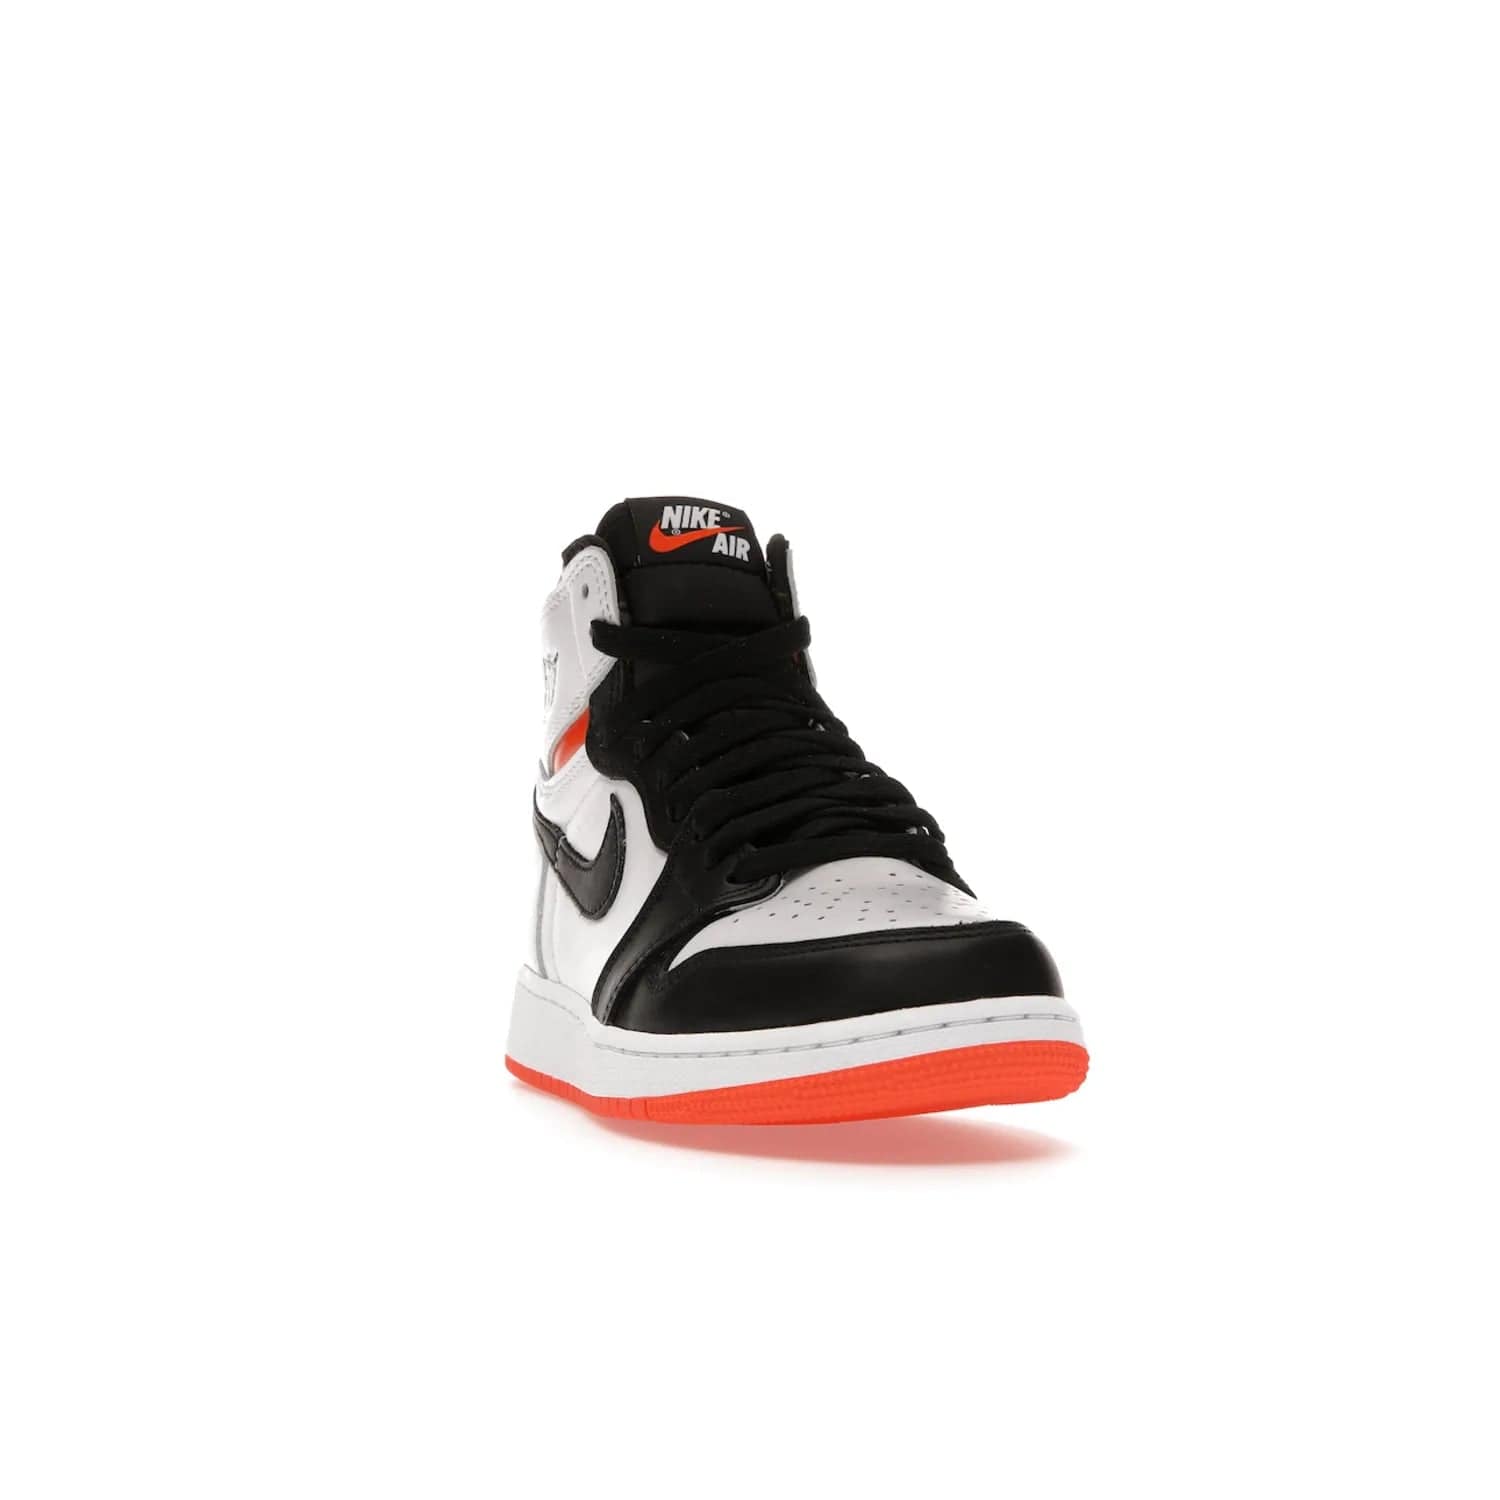 Jordan 1 High OG Electro Orange (GS) - Image 8 - Only at www.BallersClubKickz.com - The Air Jordan 1 High OG Electro Orange GS is the ideal shoe for kids on the go. Featuring white leather uppers, black overlays, and bright orange accents, it's sure to become a favorite. A great mix of classic style and vibrant colors, the shoe delivers air cushioning for comfort and hard orange rubber for grip. Release on July 17th, 2021. Get them a pair today.